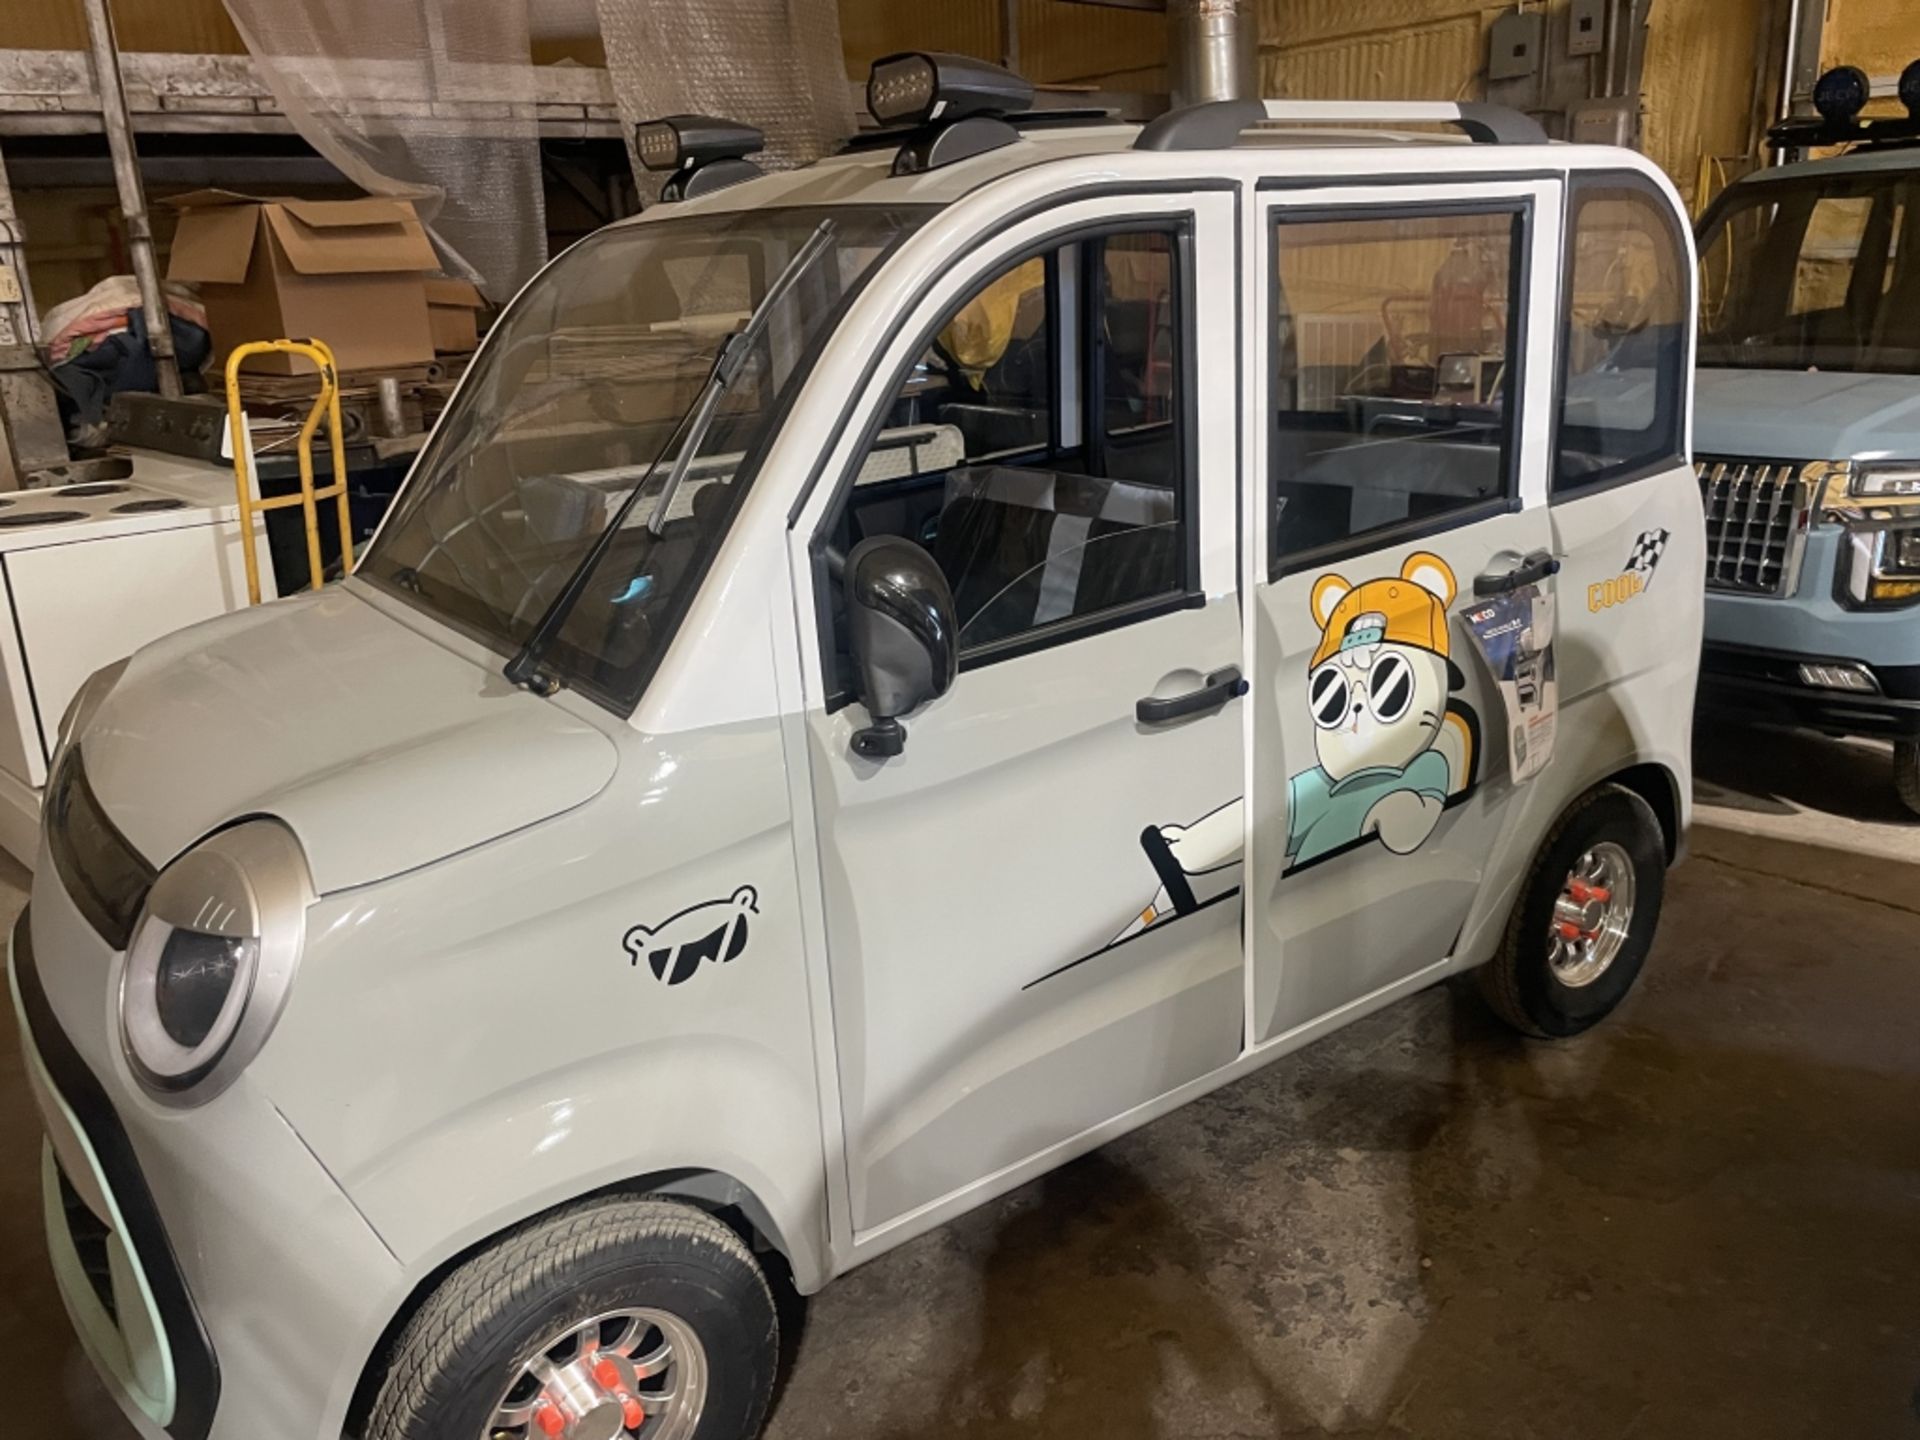 MECO M-F Electric Vehicle - Image 2 of 18